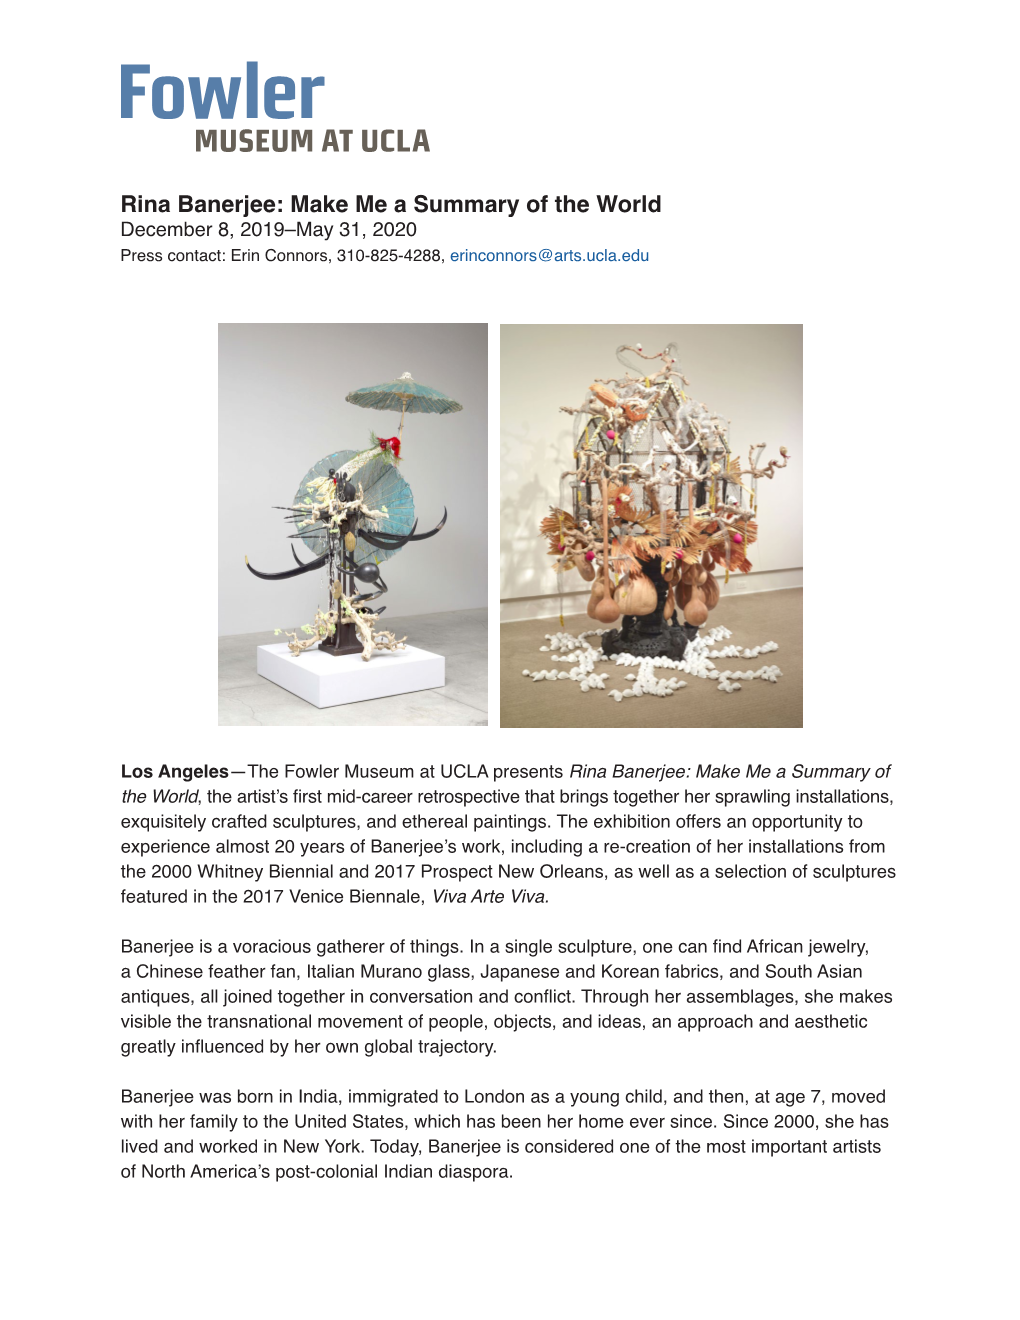 Rina Banerjee: Make Me a Summary of the World December 8, 2019–May 31, 2020 Press Contact: Erin Connors, 310-825-4288, Erinconnors@Arts.Ucla.Edu